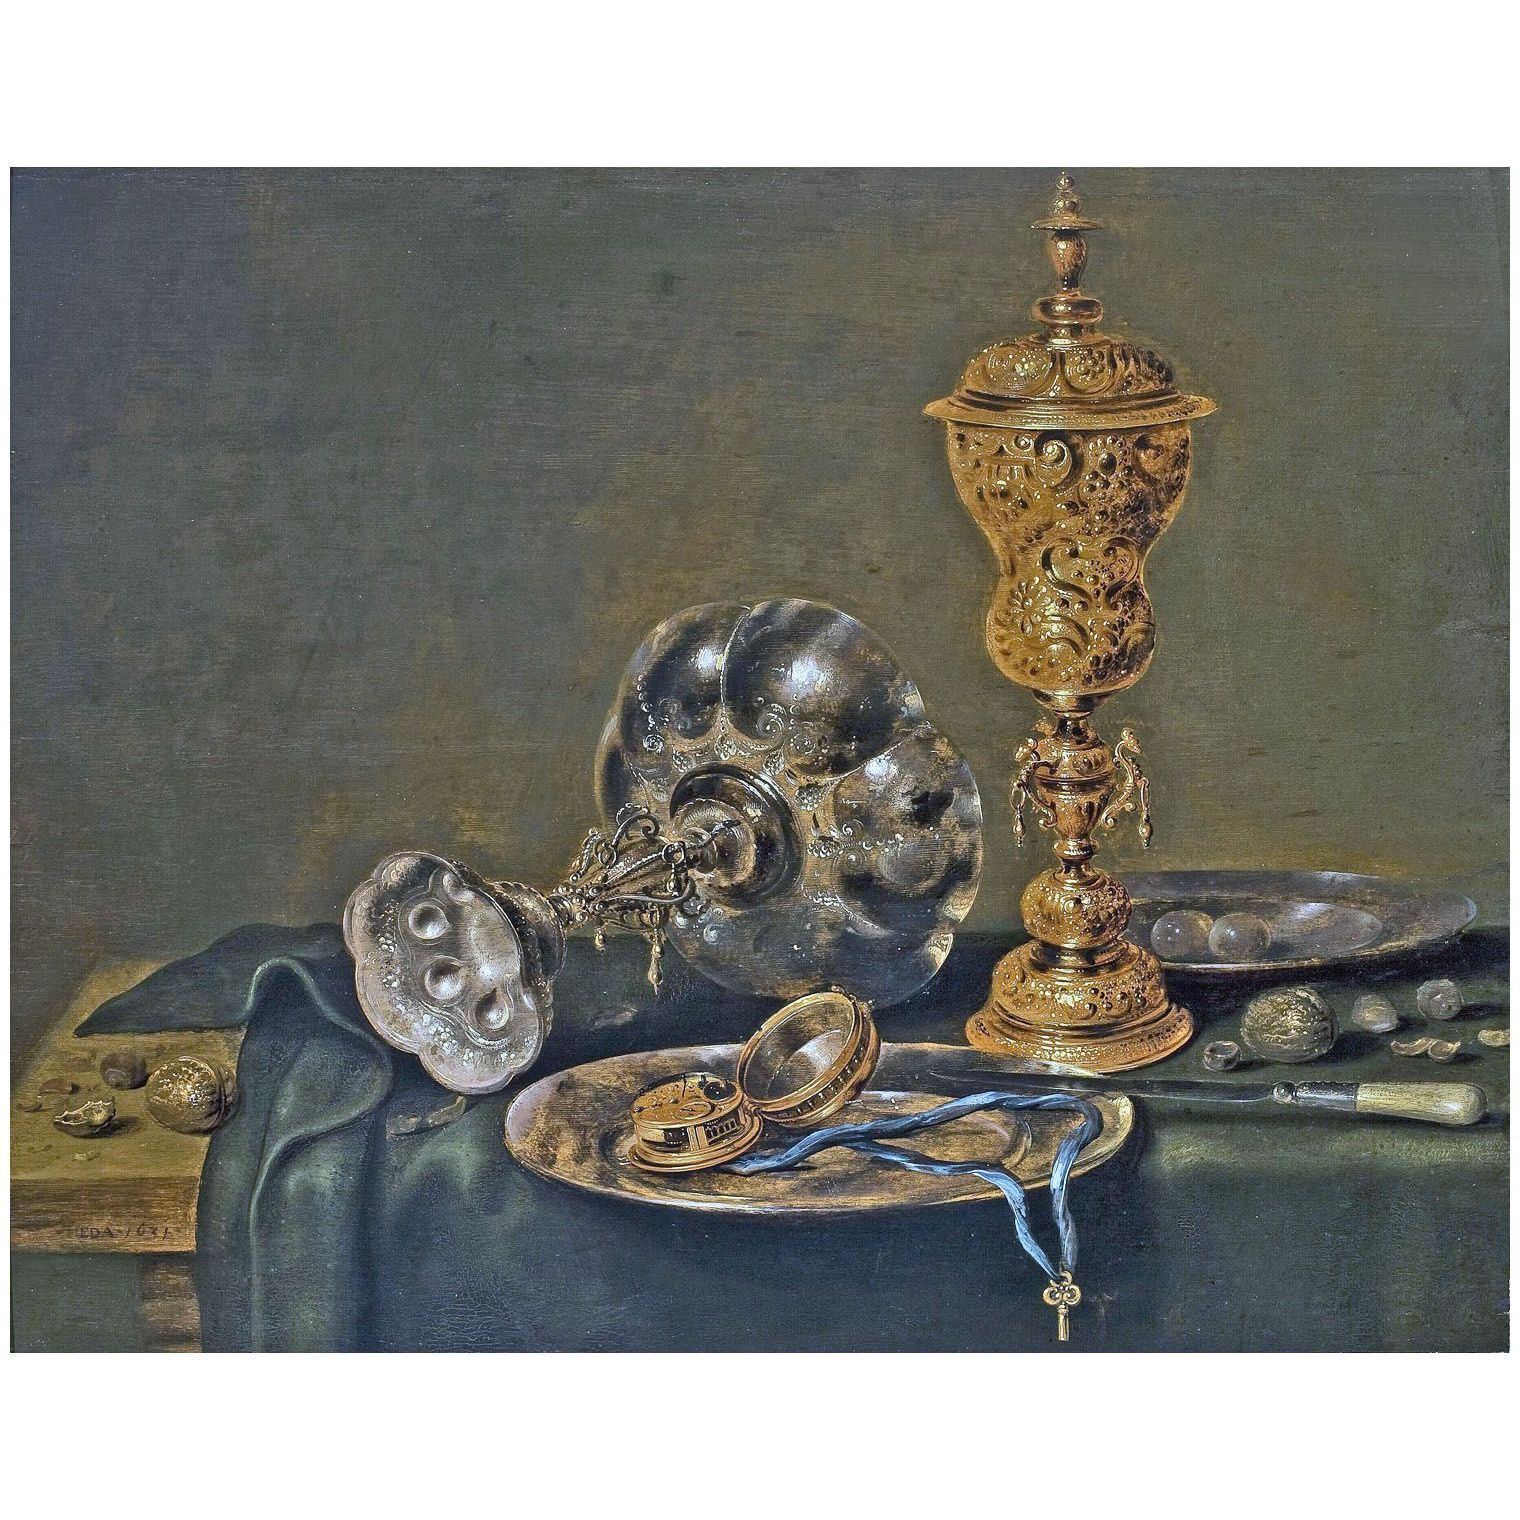 Willem Claesz Heda. Still-Life with Metal Vessels and a Watch. 1631. National Museum Warsaw